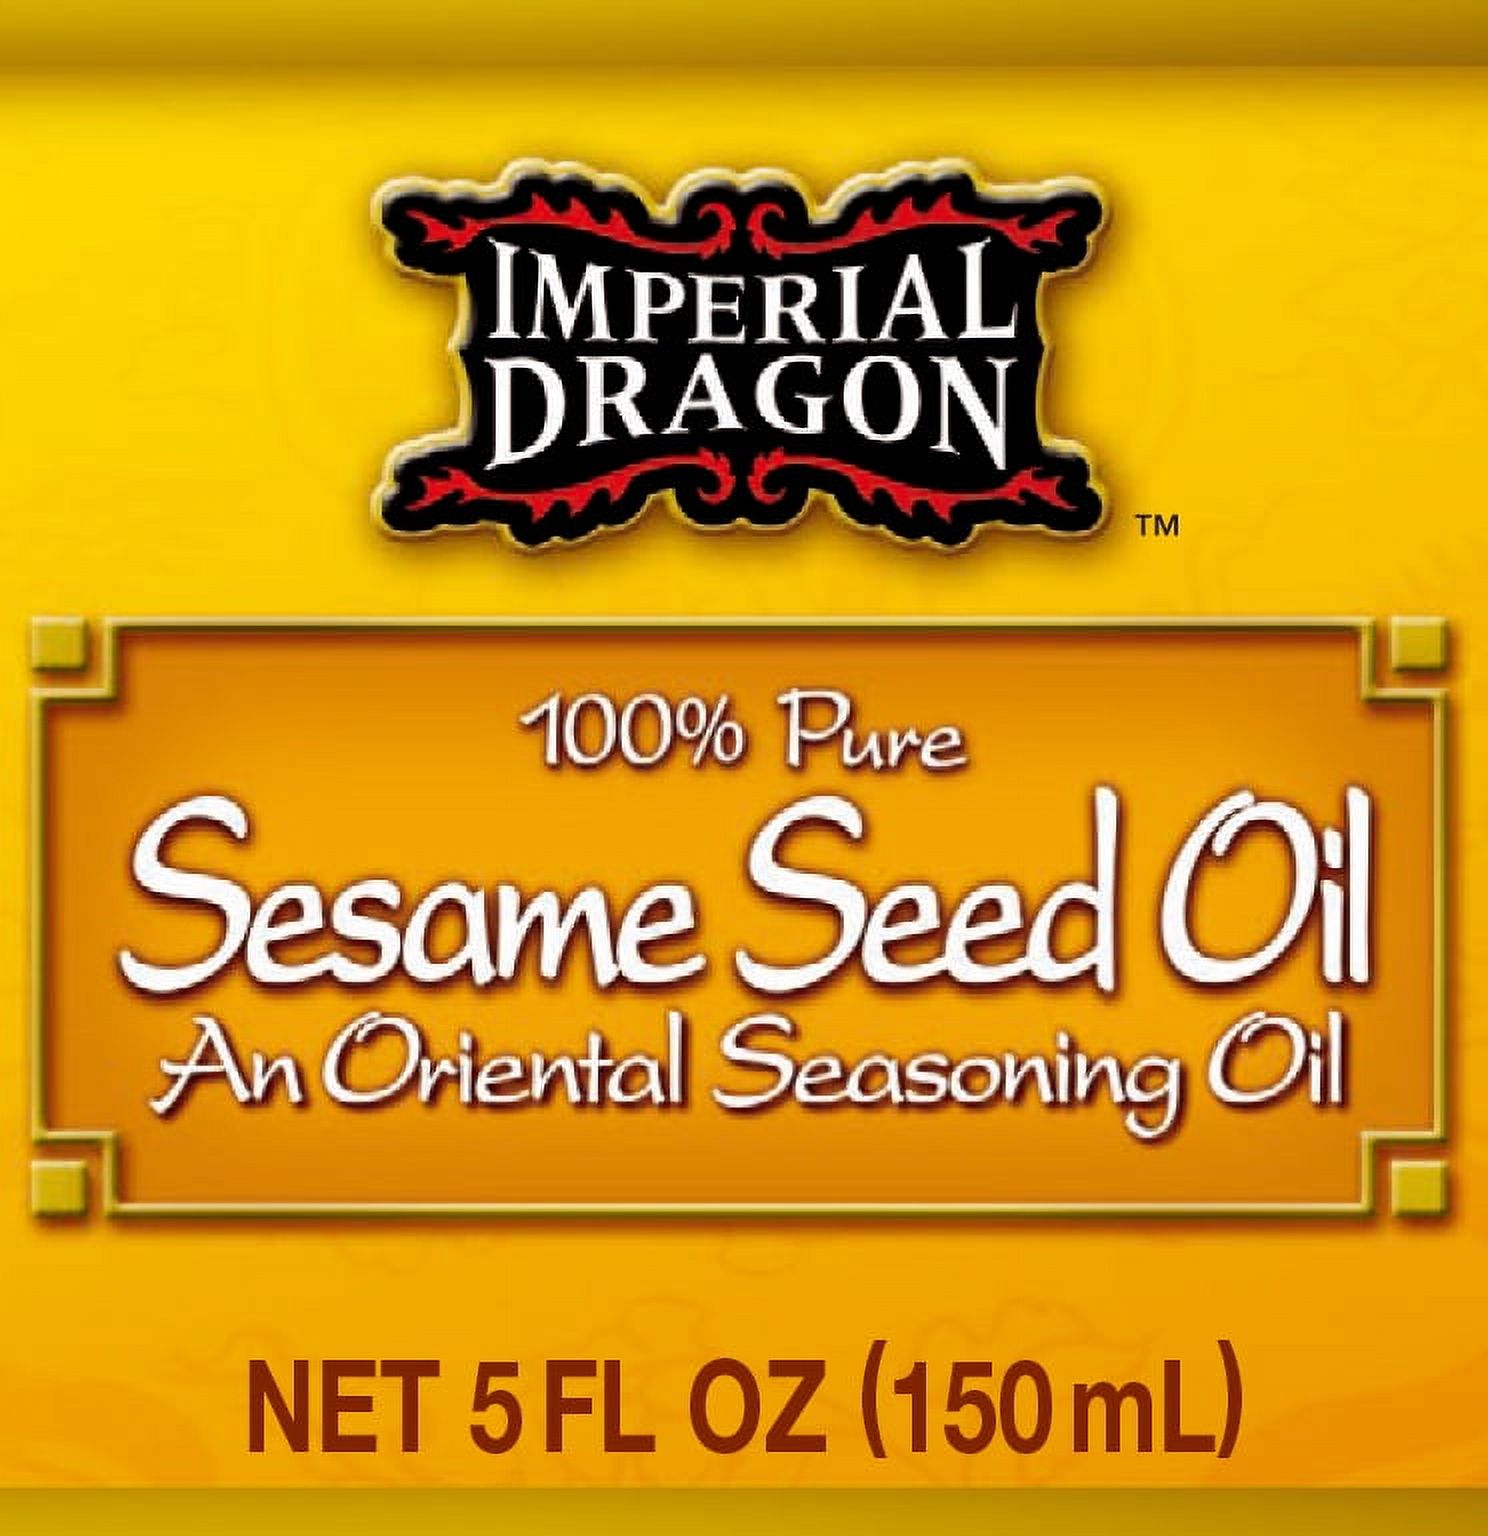 Imperial Dragon 100% Pure Sesame Seed Oil, 5 fl oz - image 2 of 6